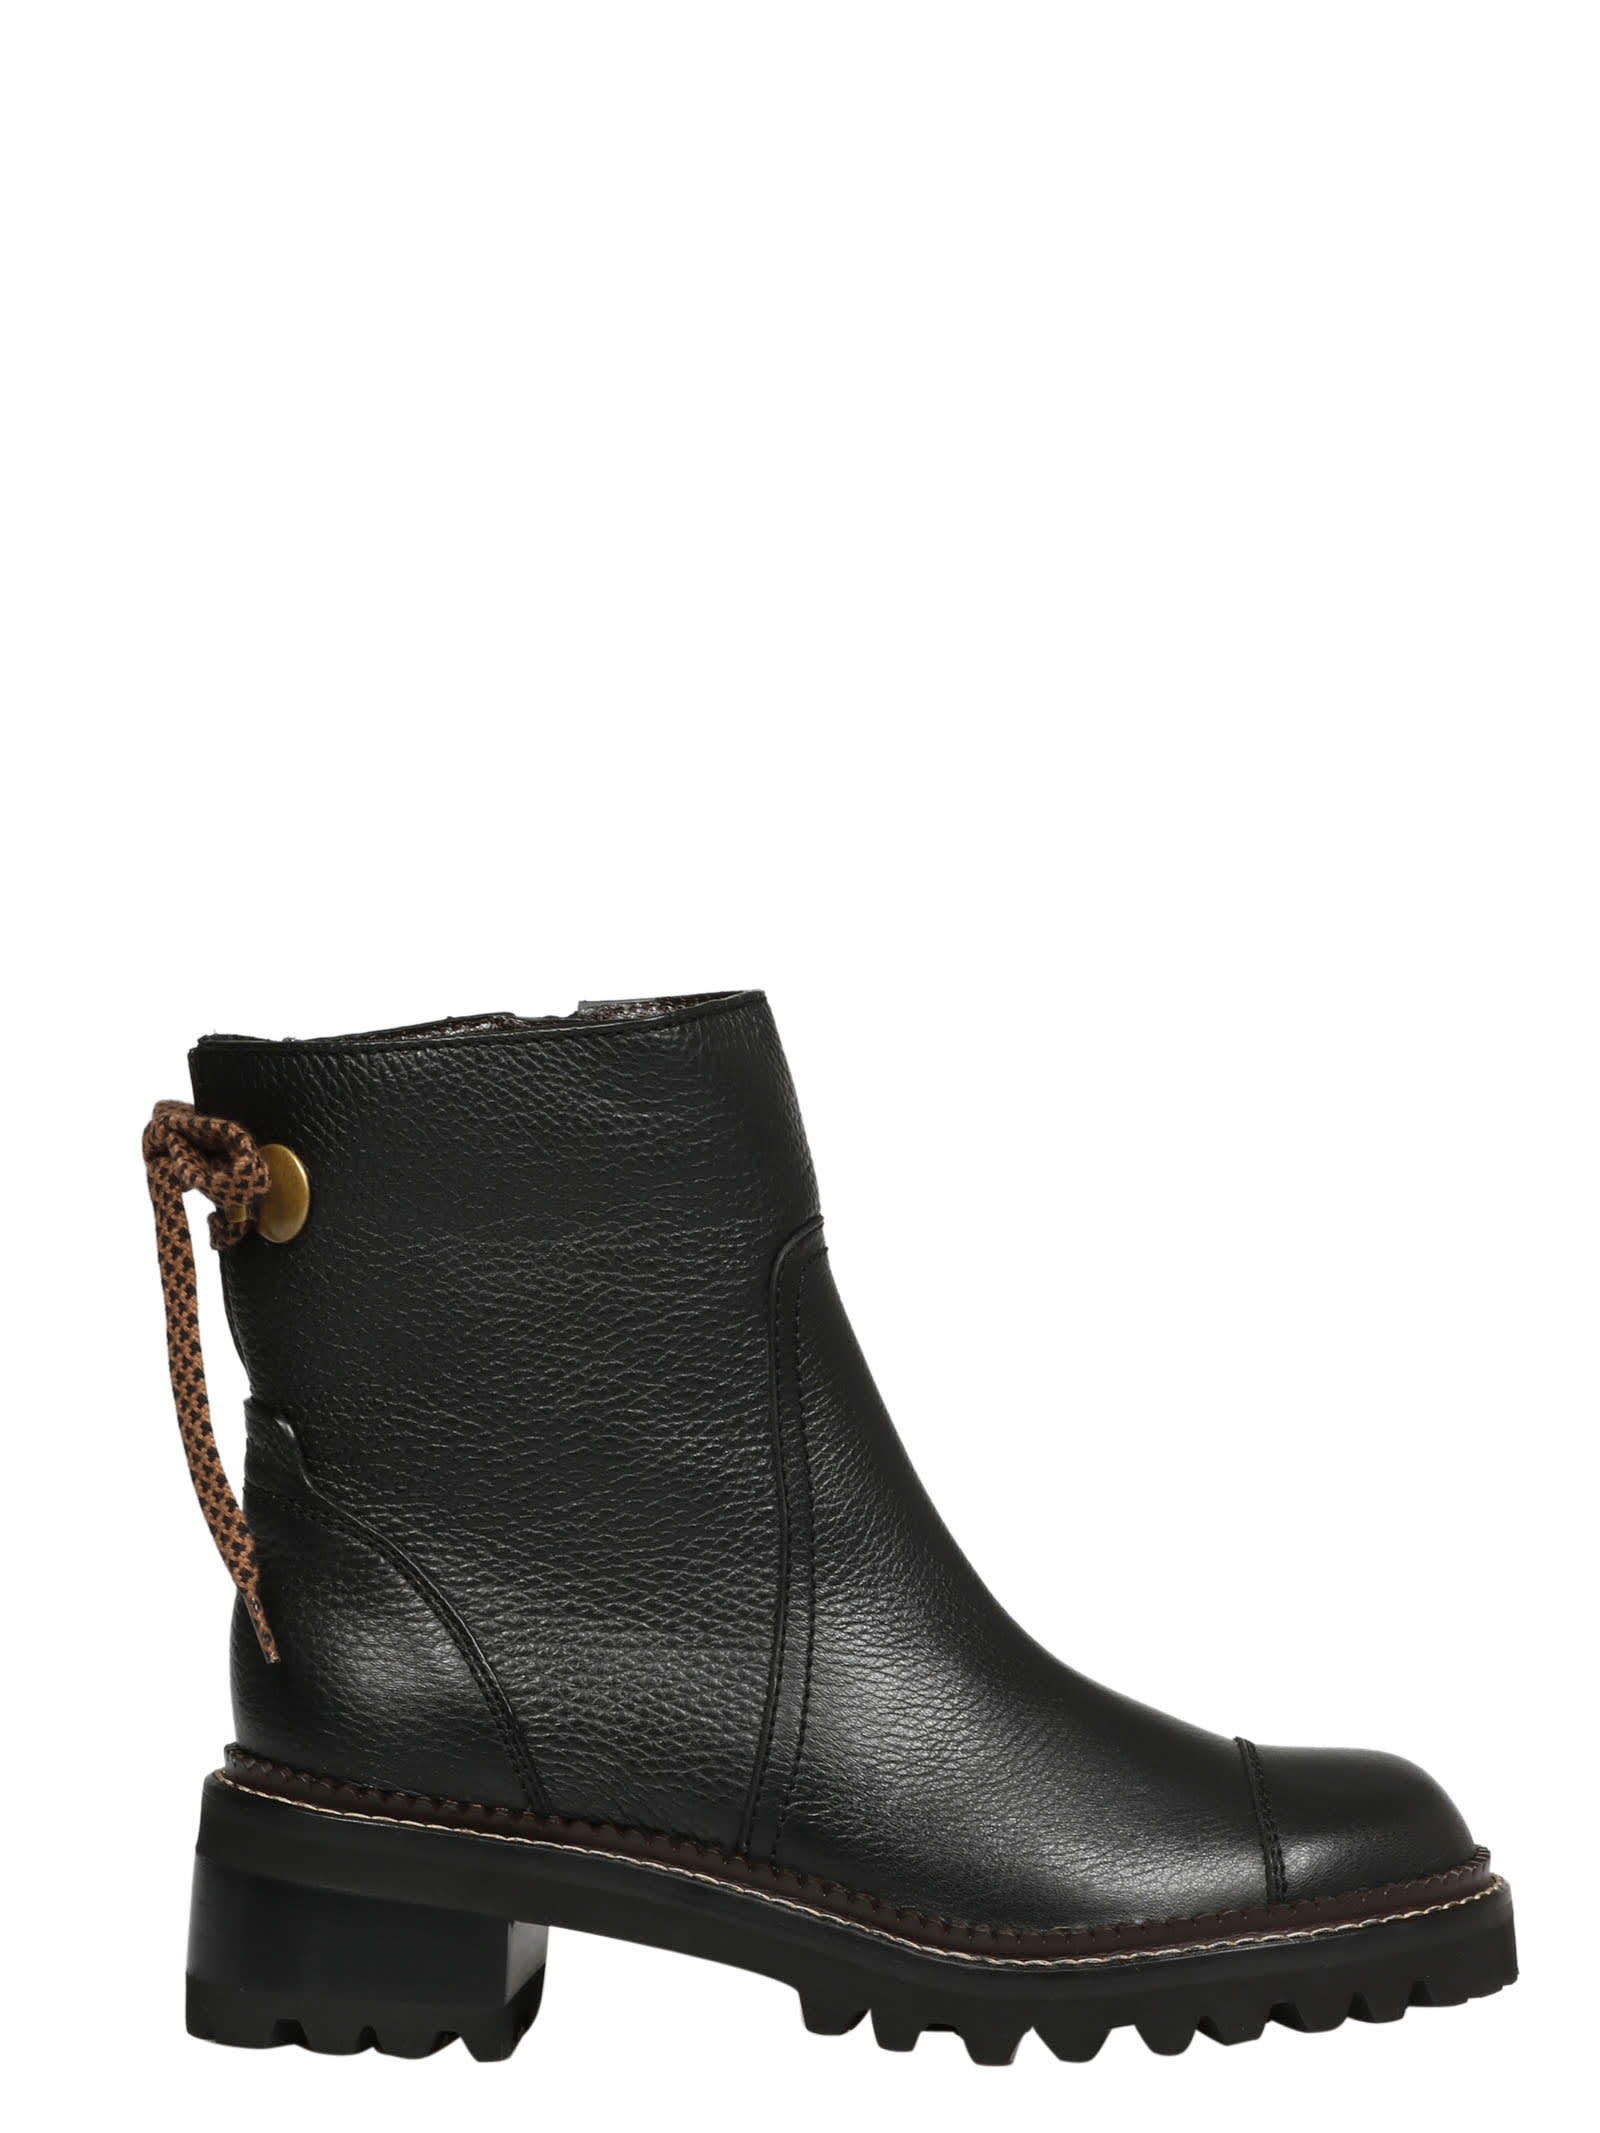 SEE BY CHLOÉ ANKLE BOOT,11518355